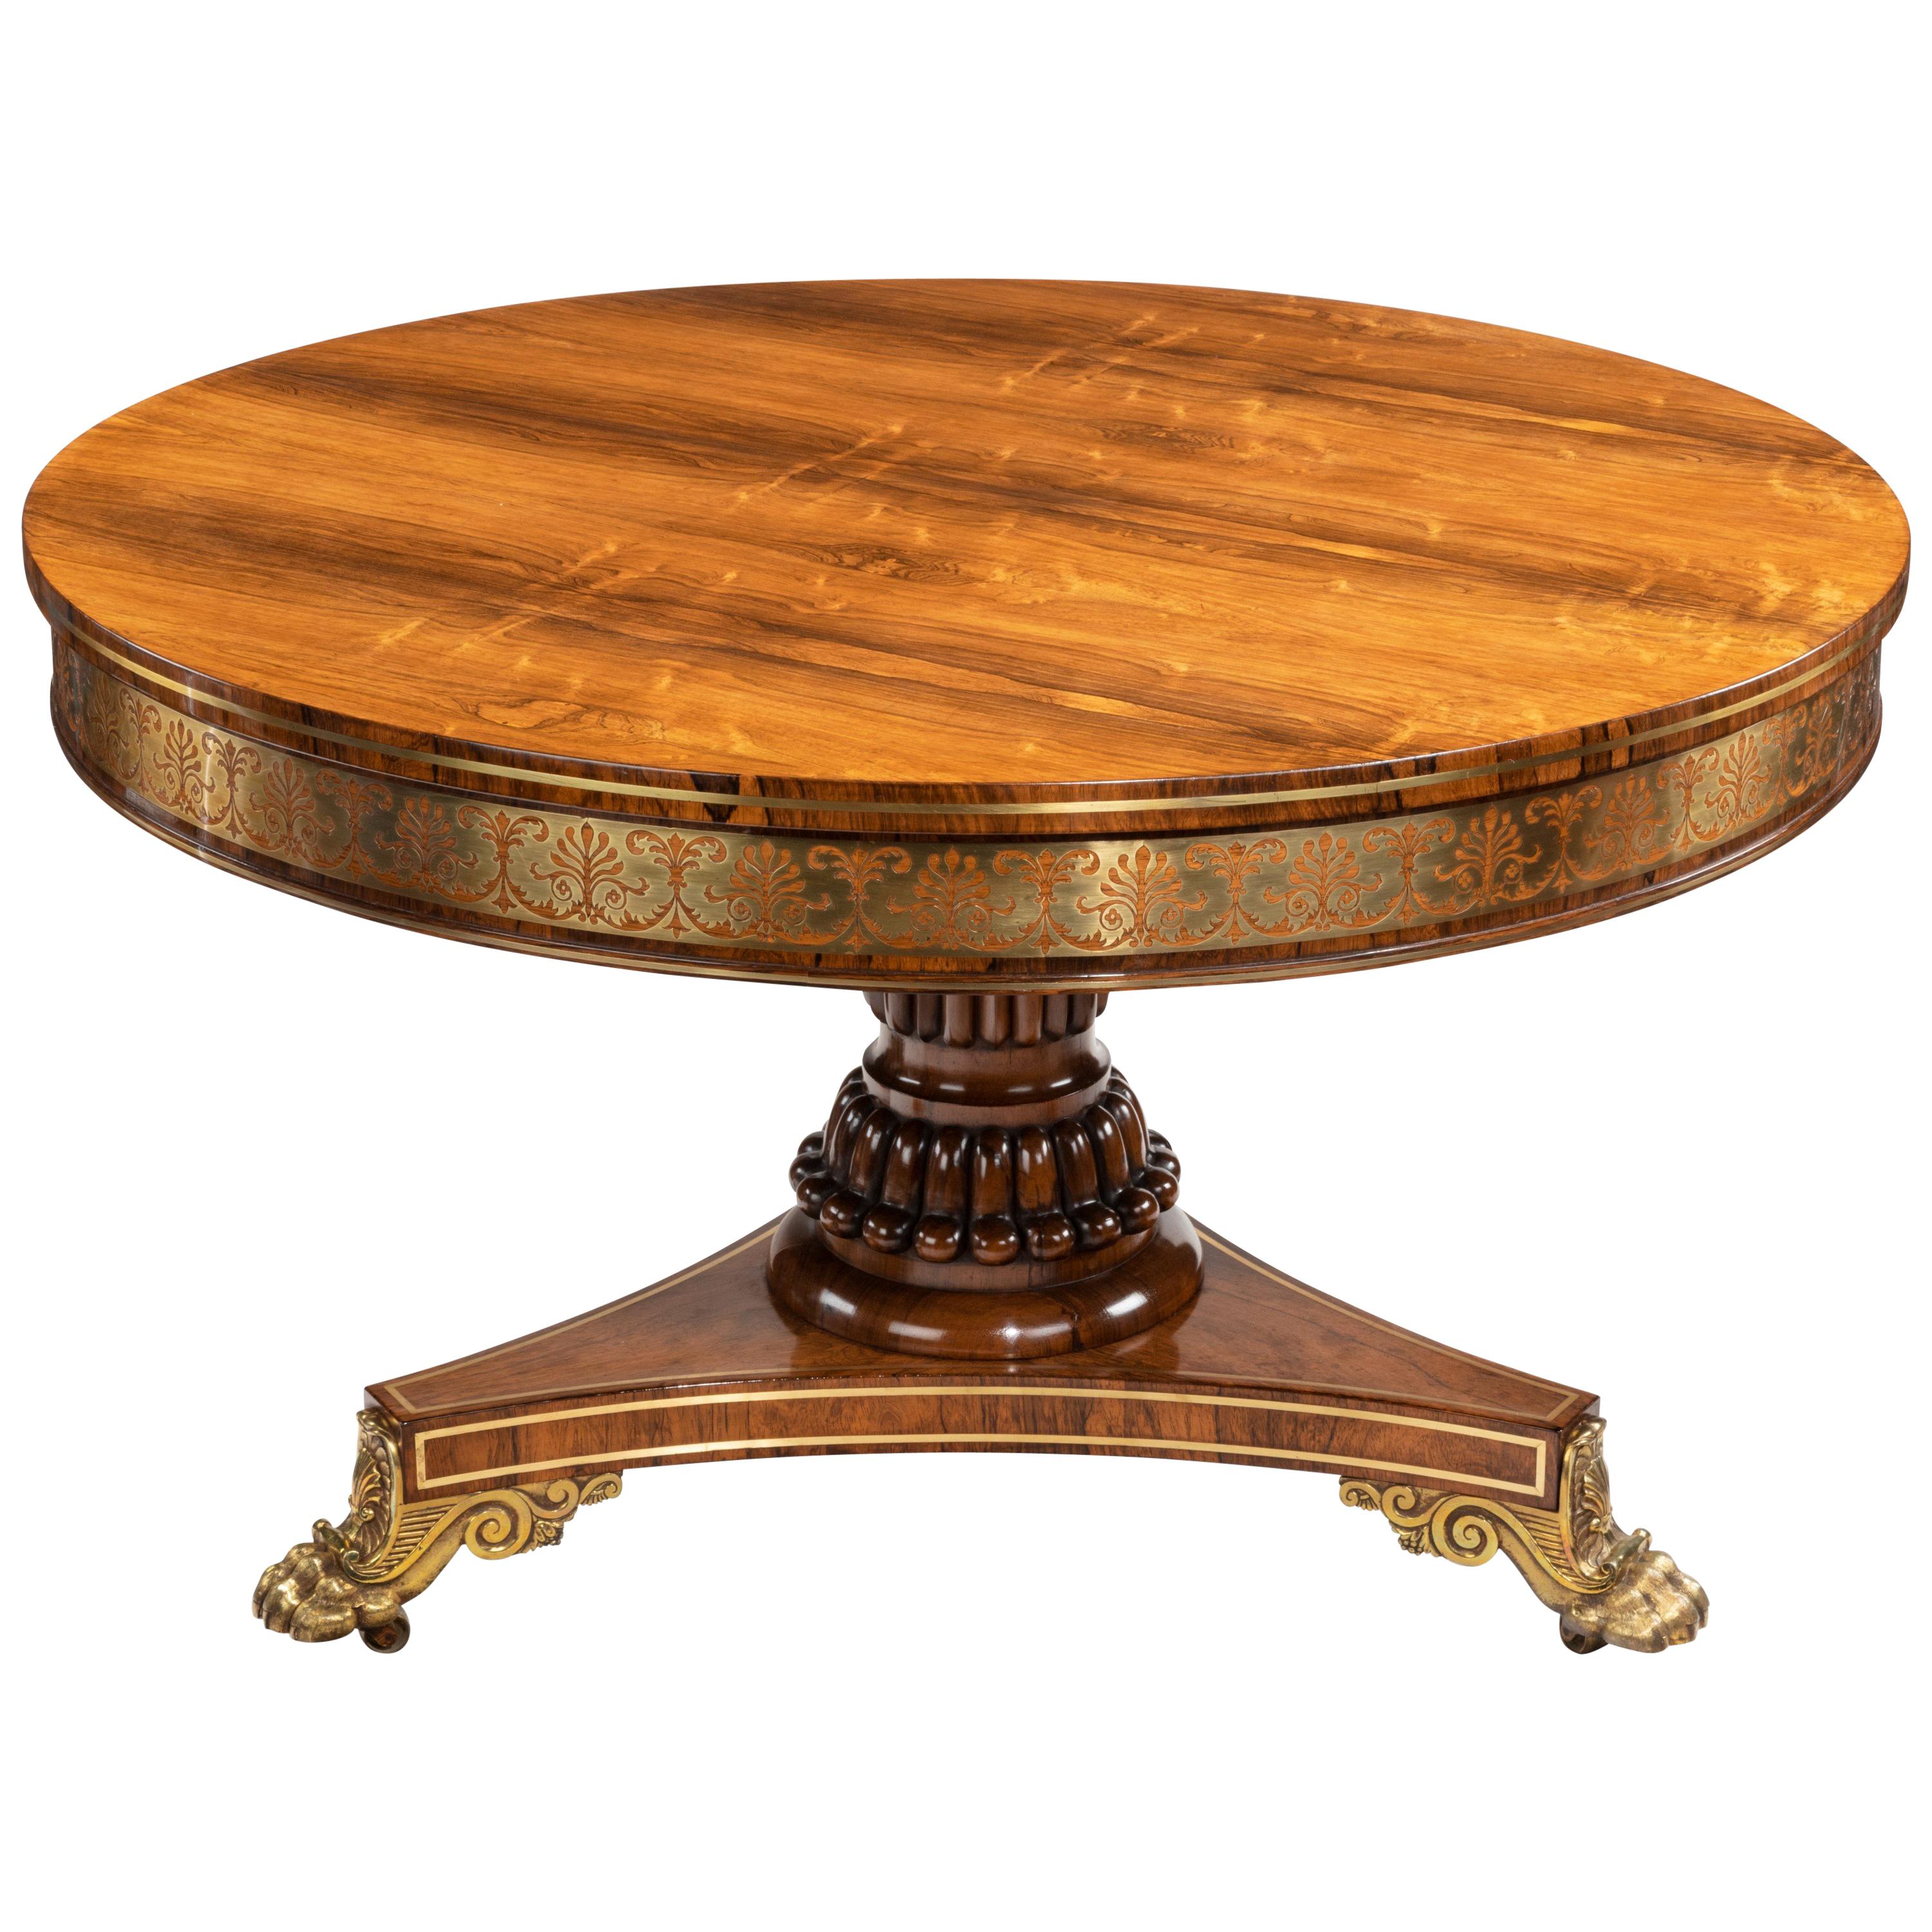 George IV Brass-Inlaid Rosewood Centre Table Attributed to Gillows